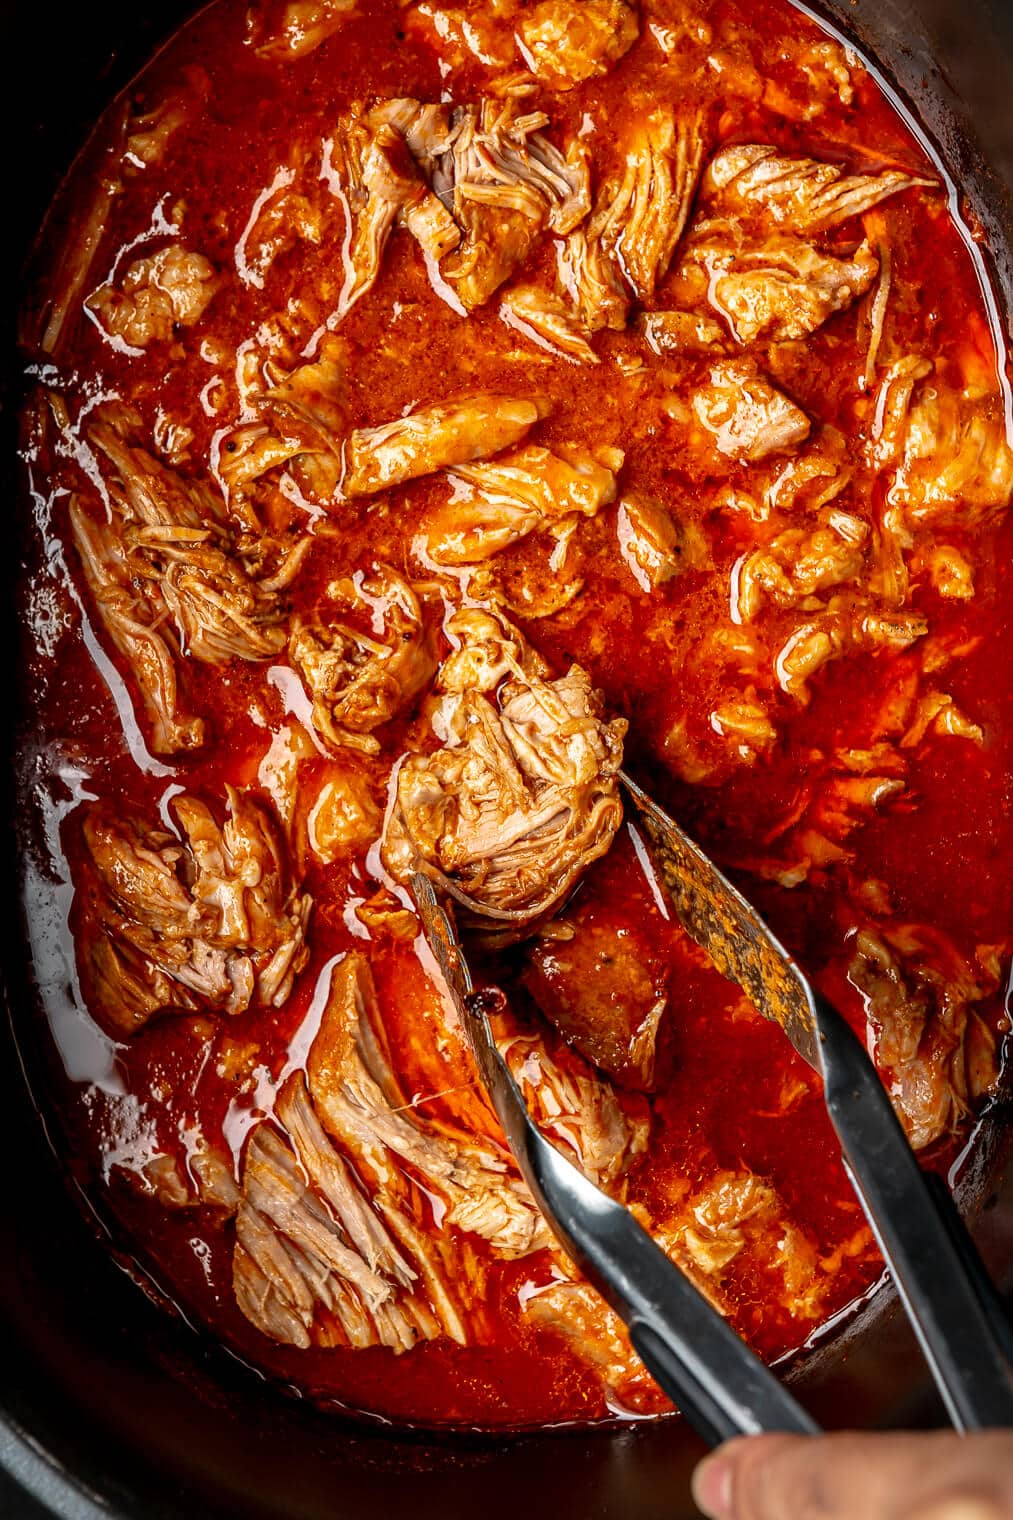 A crock pot of BBQ pulled pork. Some of the pork is being pulled out with metal tongs.